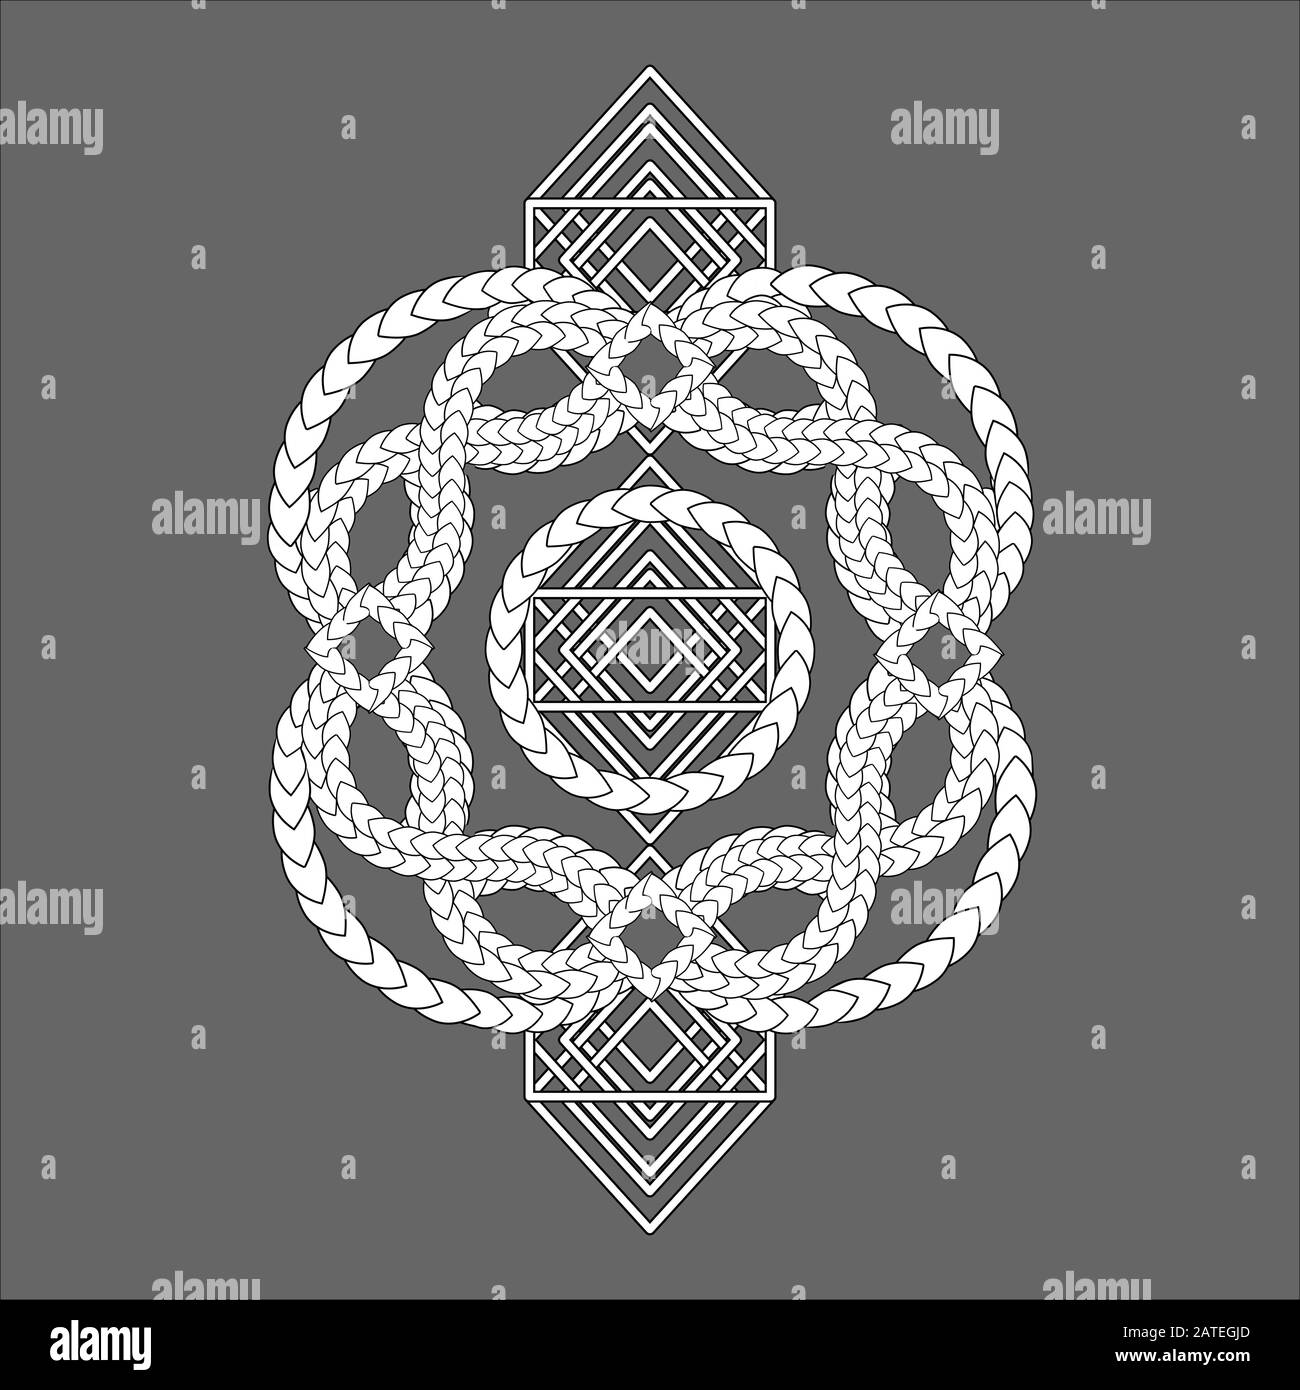 White entwined snake skins and geometric pattern on grey background Stock Vector